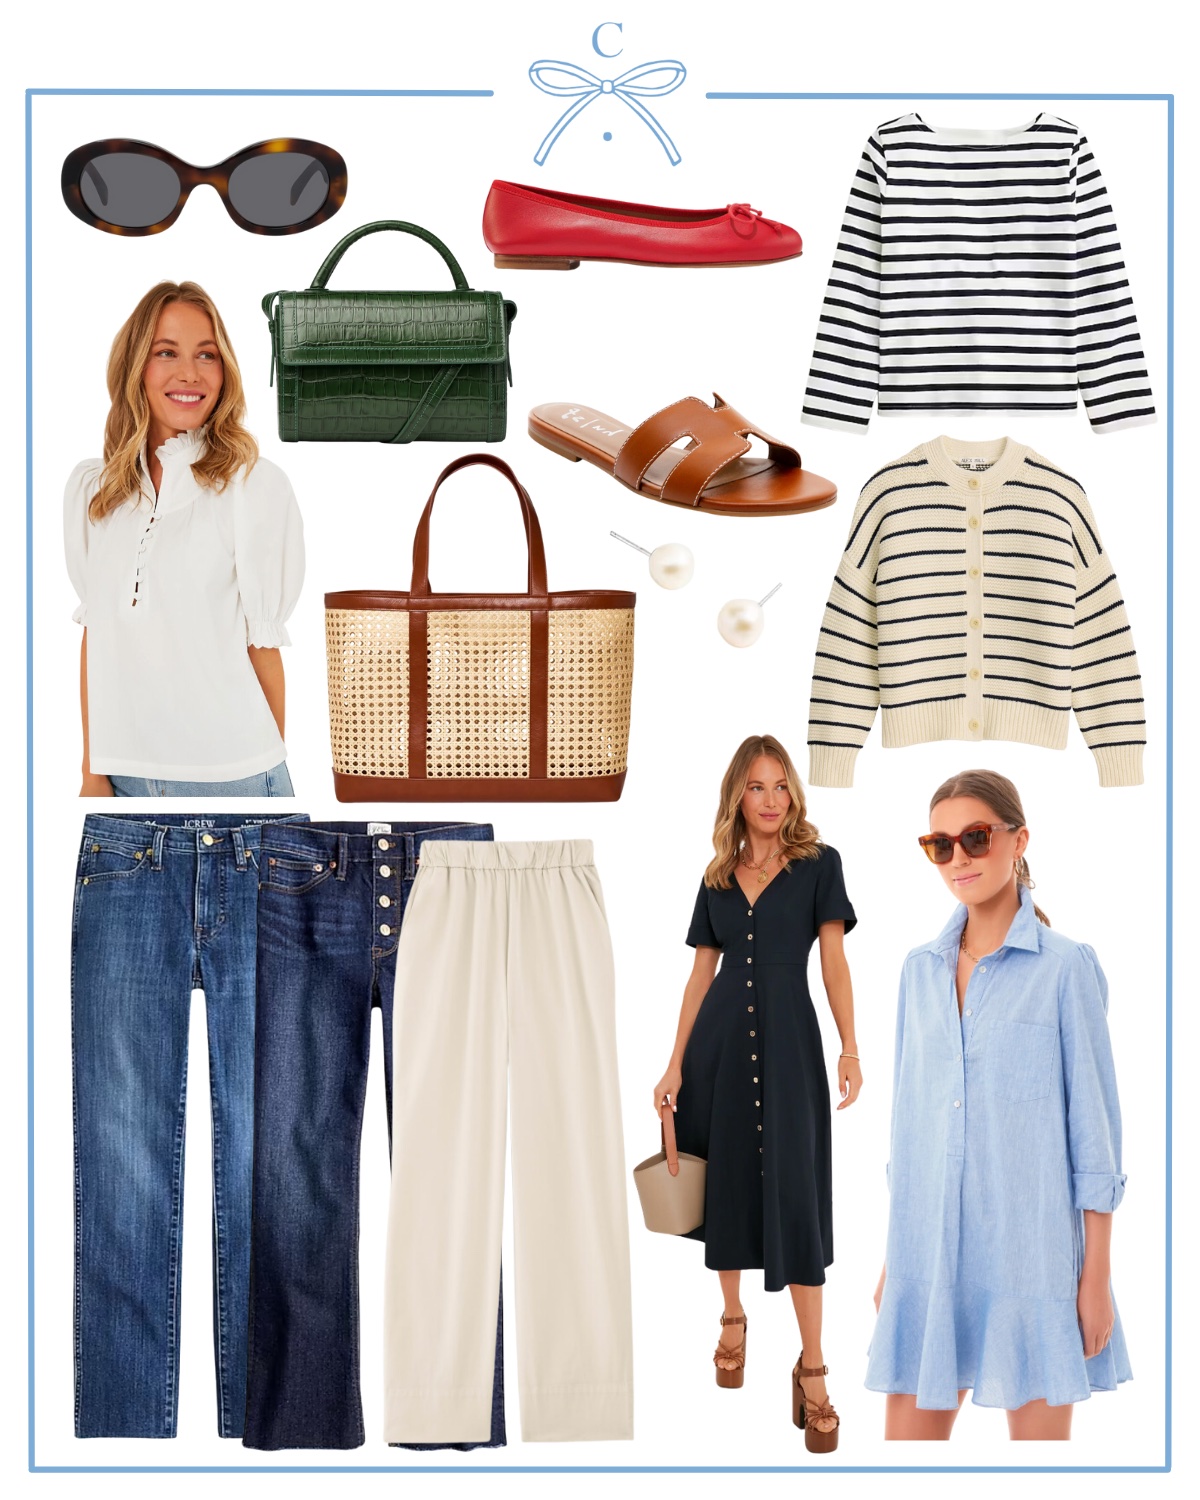 Loft Plus Size Outfits – Mix & Match Capsule Wardrobe For Spring